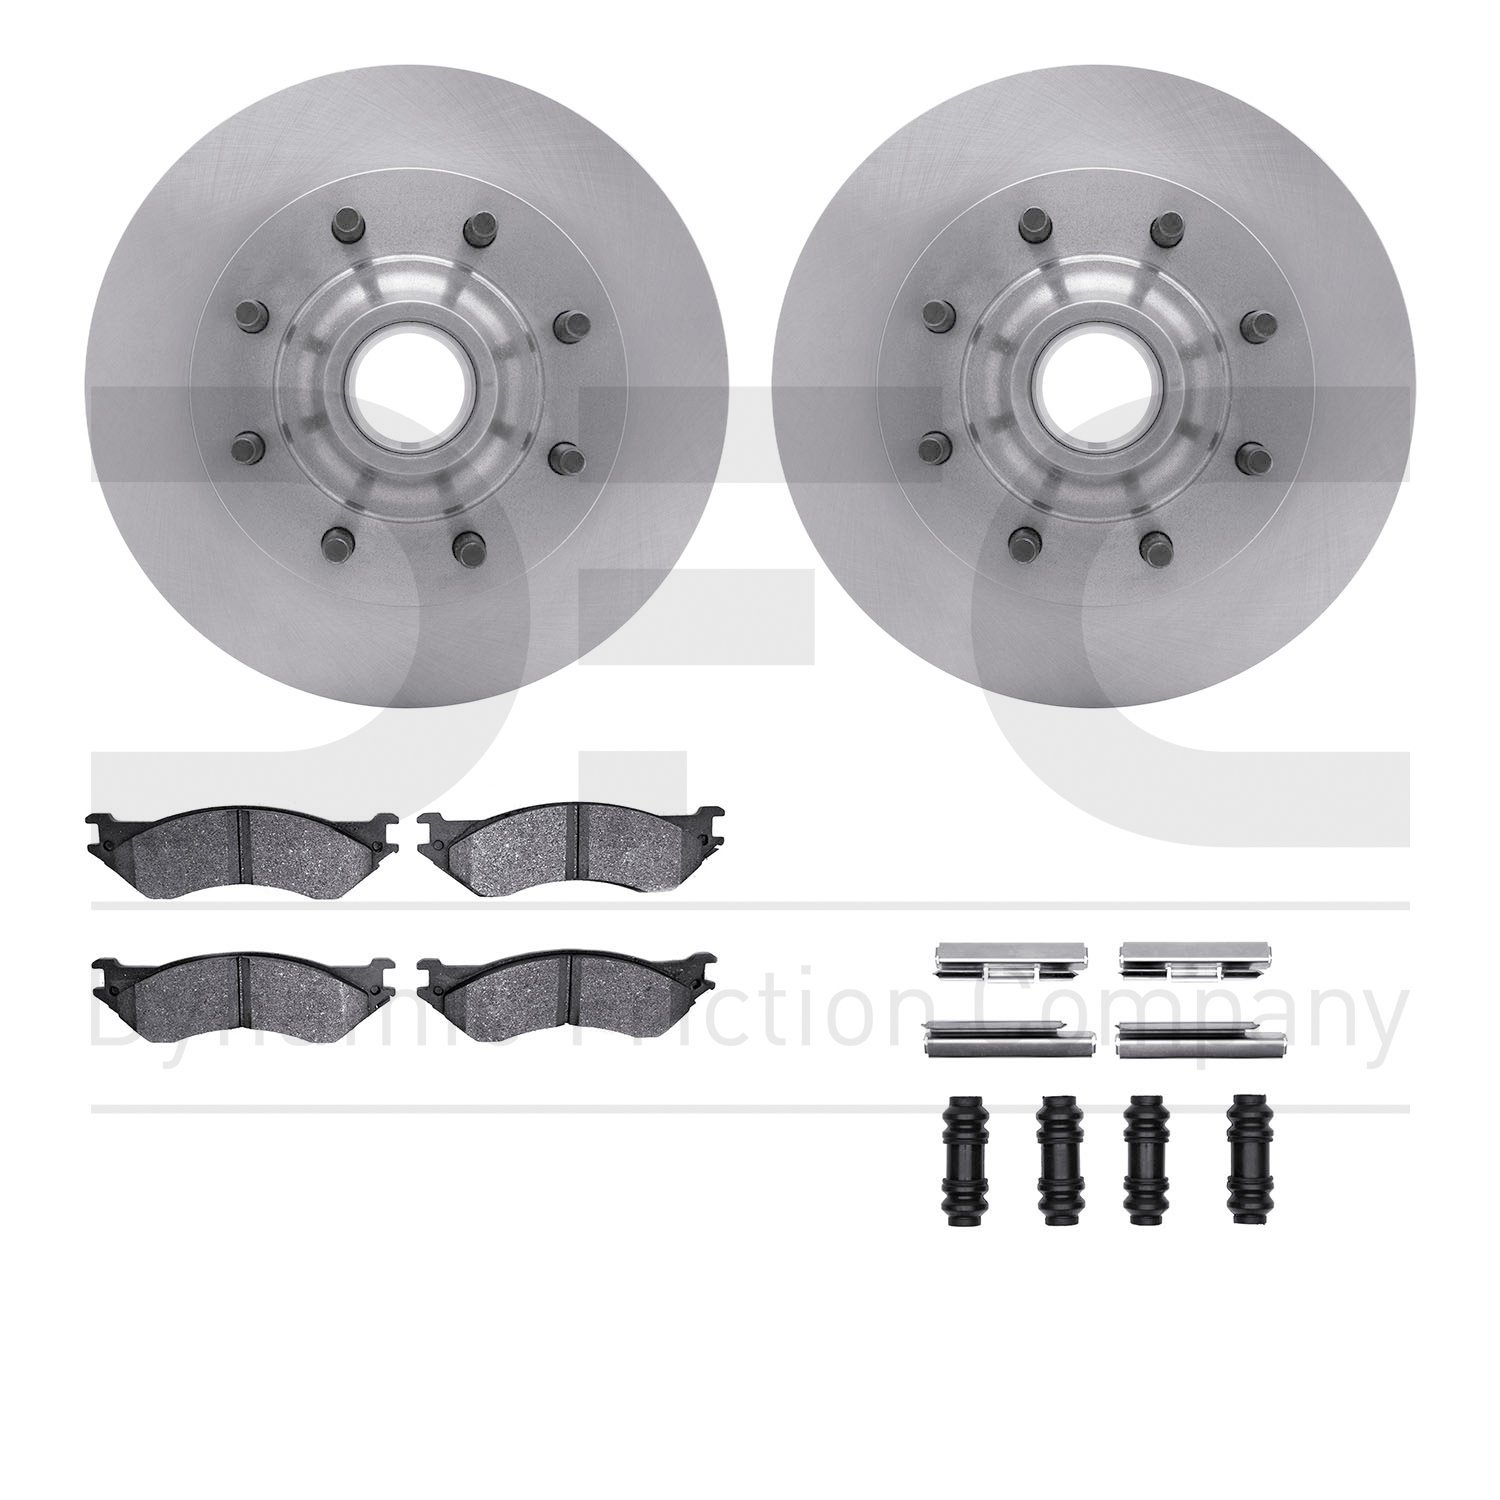 6412-54071 Brake Rotors with Ultimate-Duty Brake Pads Kit & Hardware, 2000-2004 Ford/Lincoln/Mercury/Mazda, Position: Front